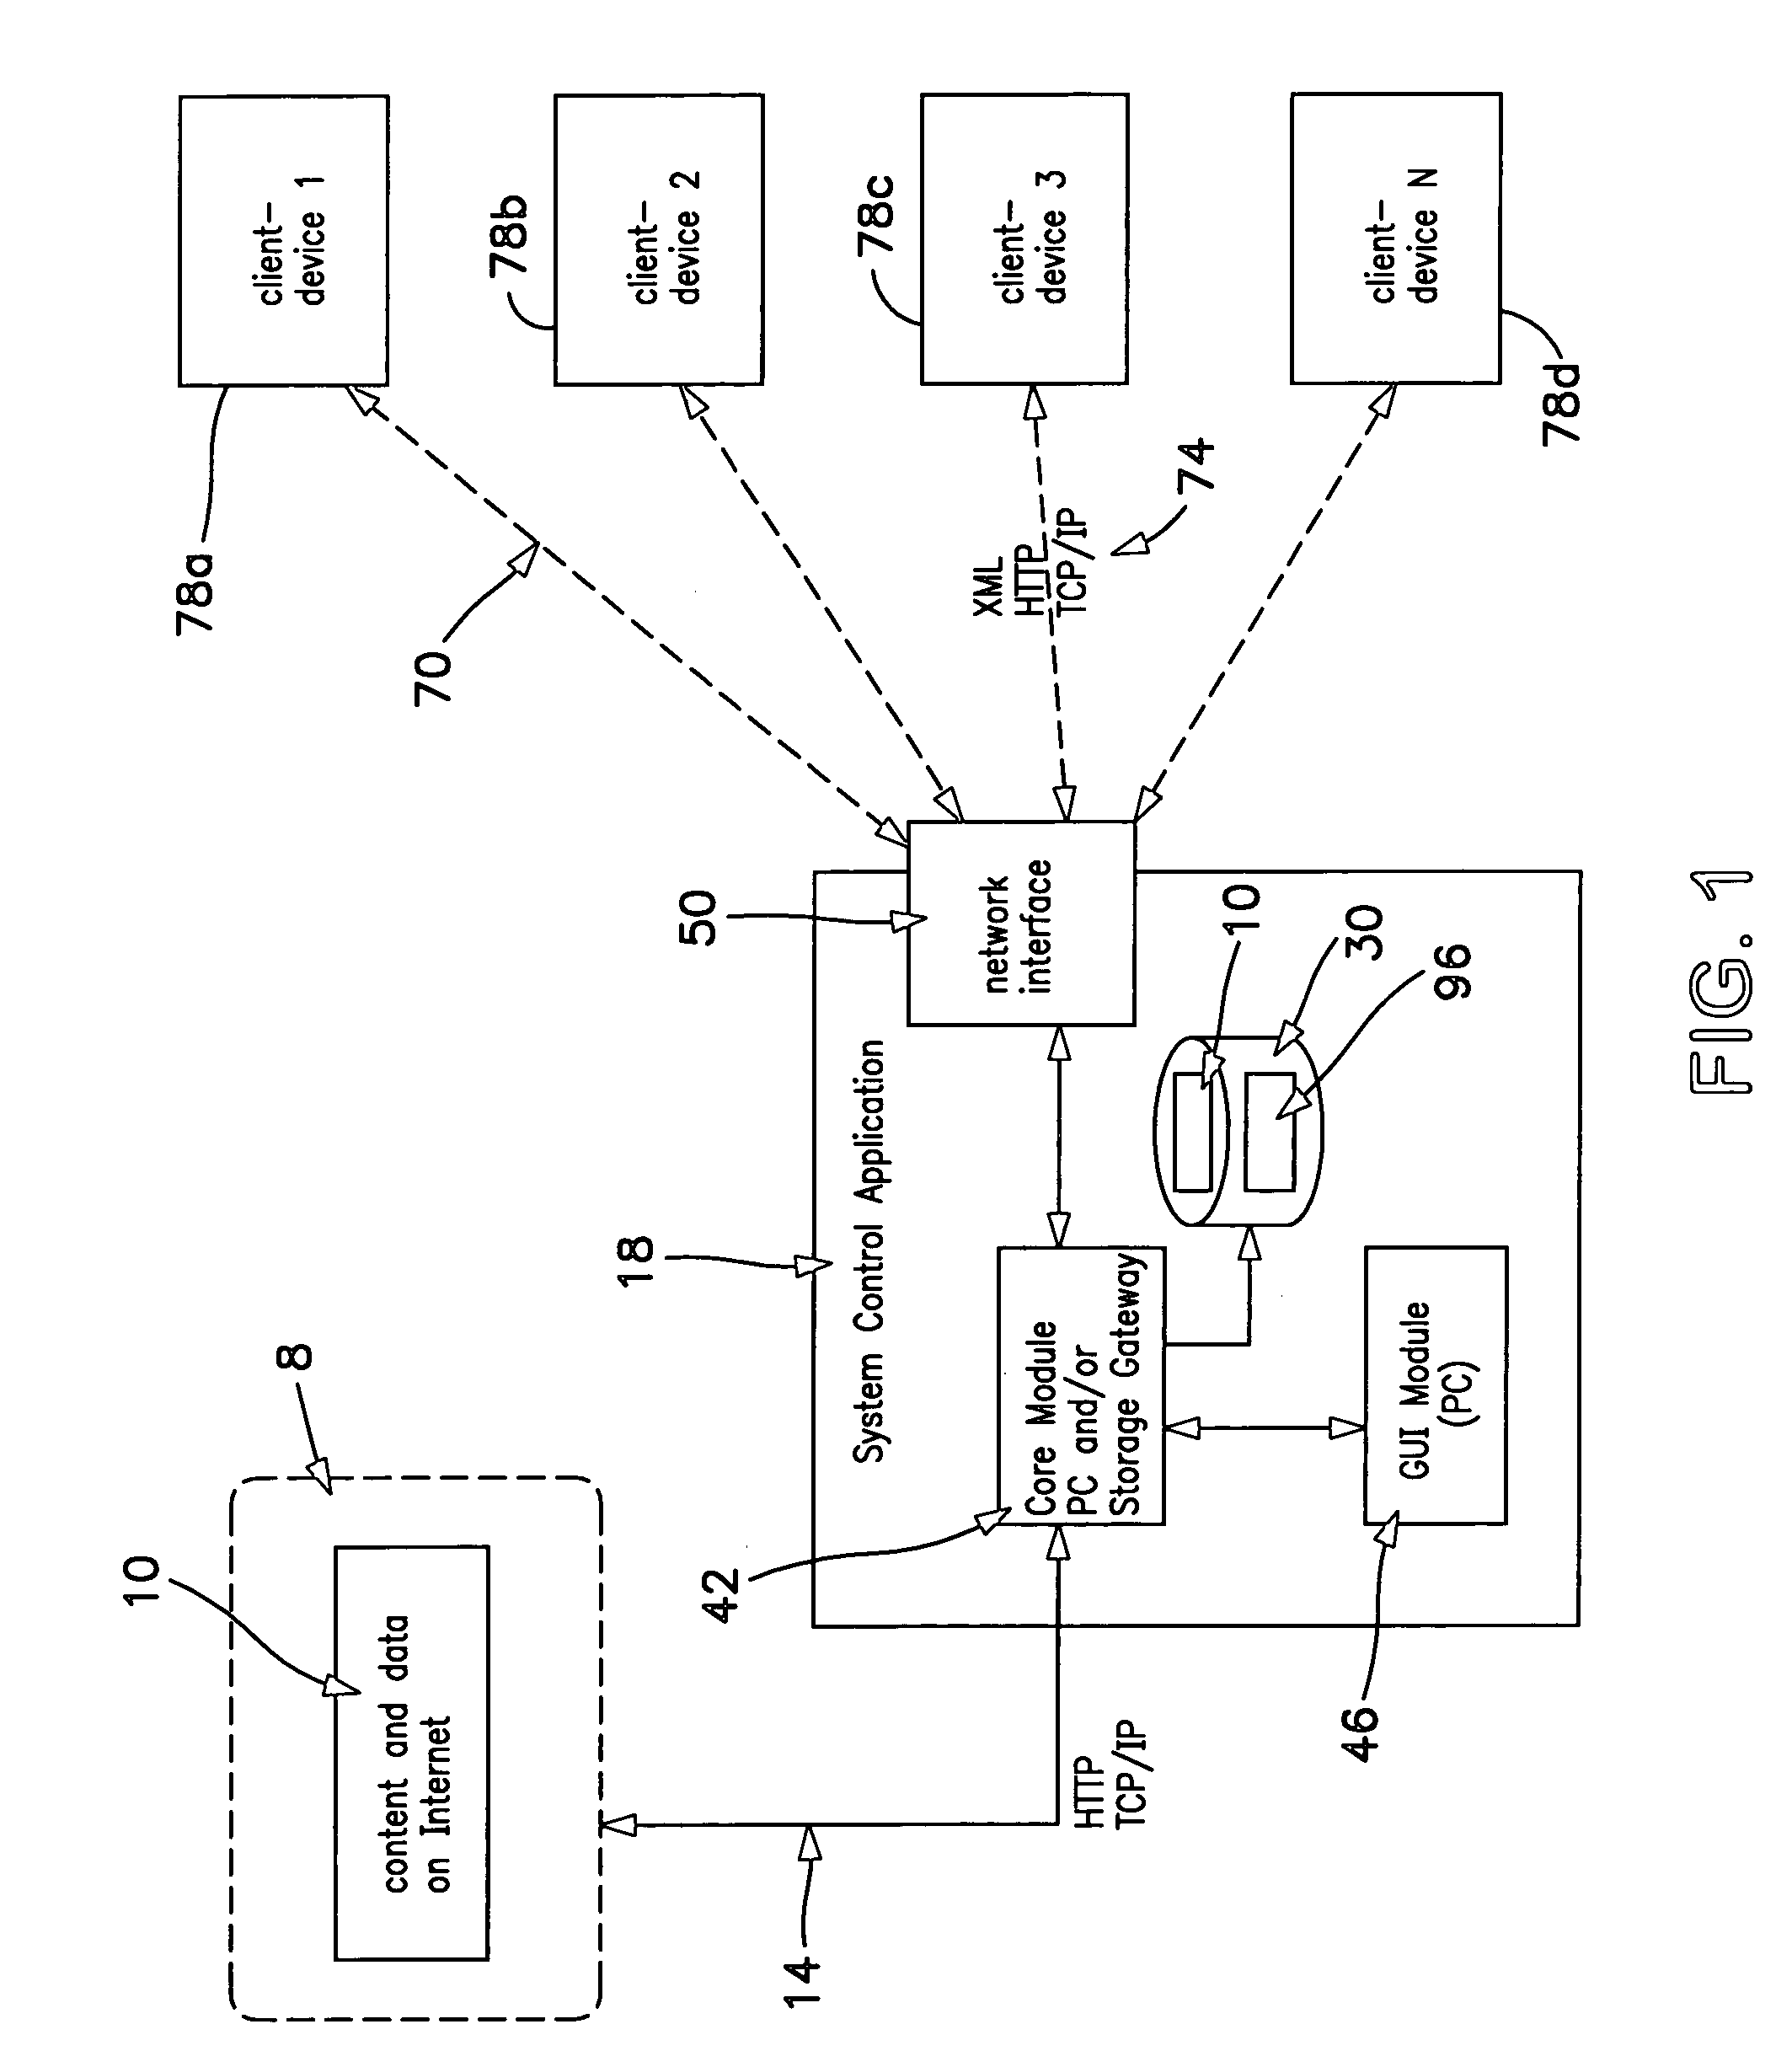 System and method for providing content, management, and interactivity for client devices